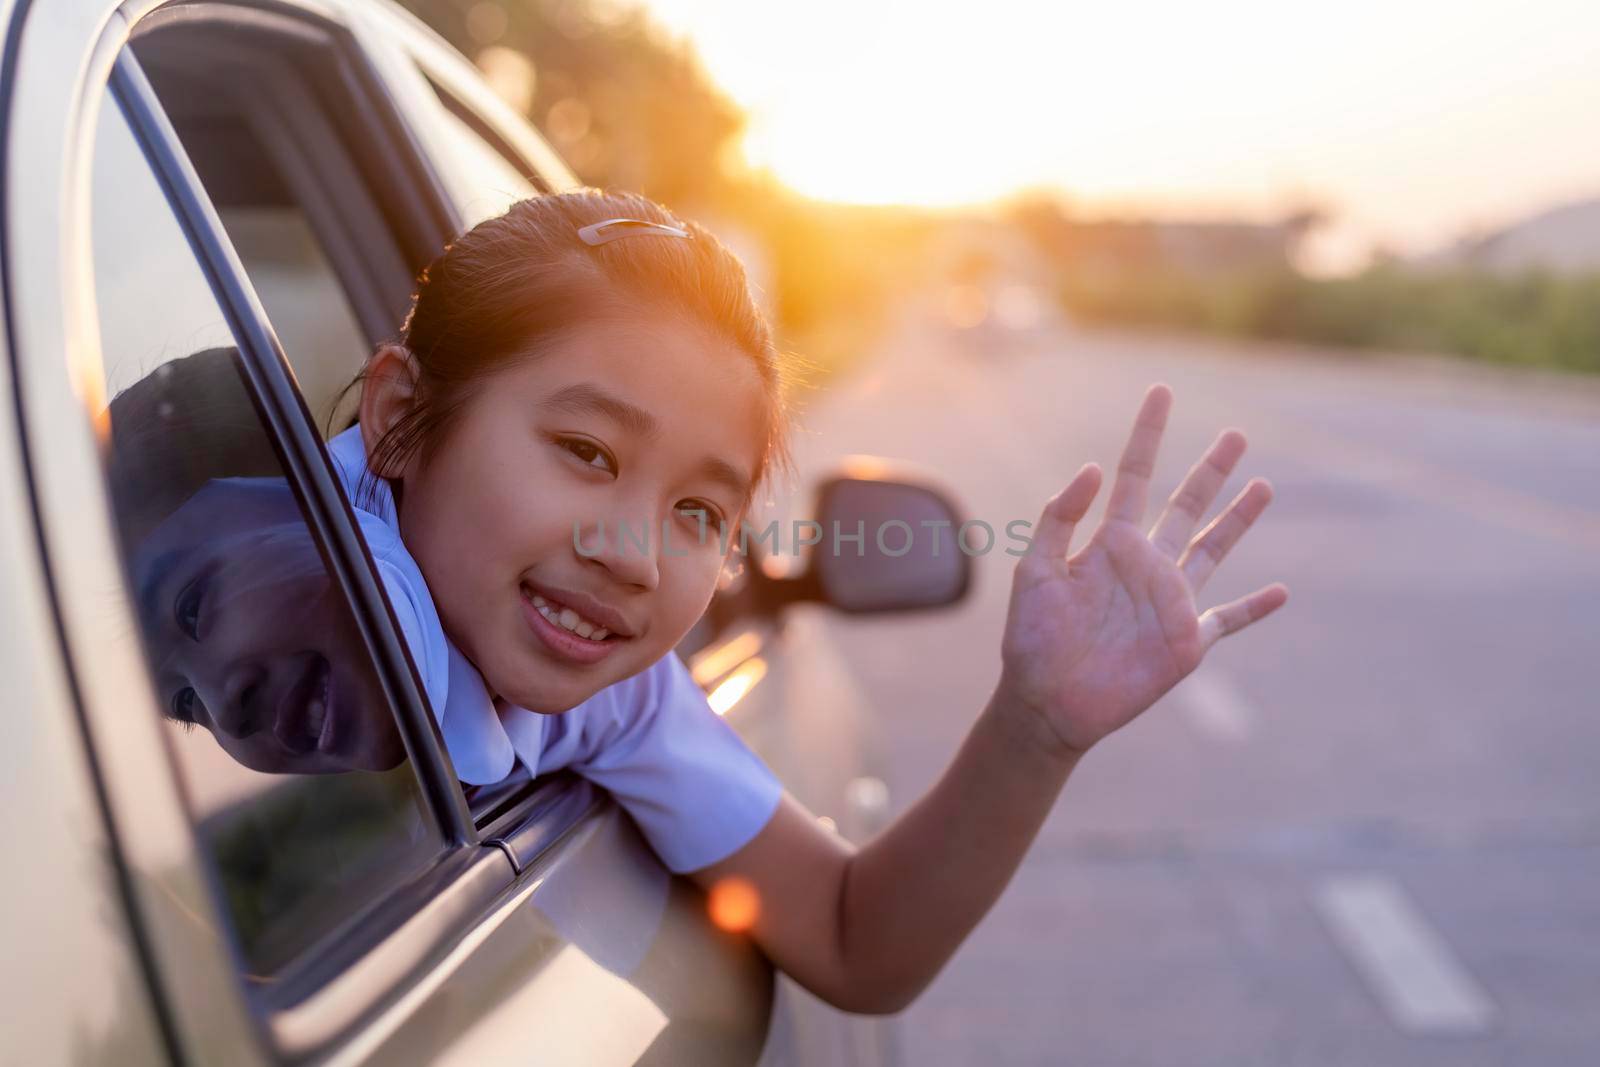 On the way to school, the little girl stretched out his hand from the car window, laughing and smiling. Asian little girl smiling  and waving hand out the car. Children relax with street view from the car. Family in car concept. by Satrinekarn